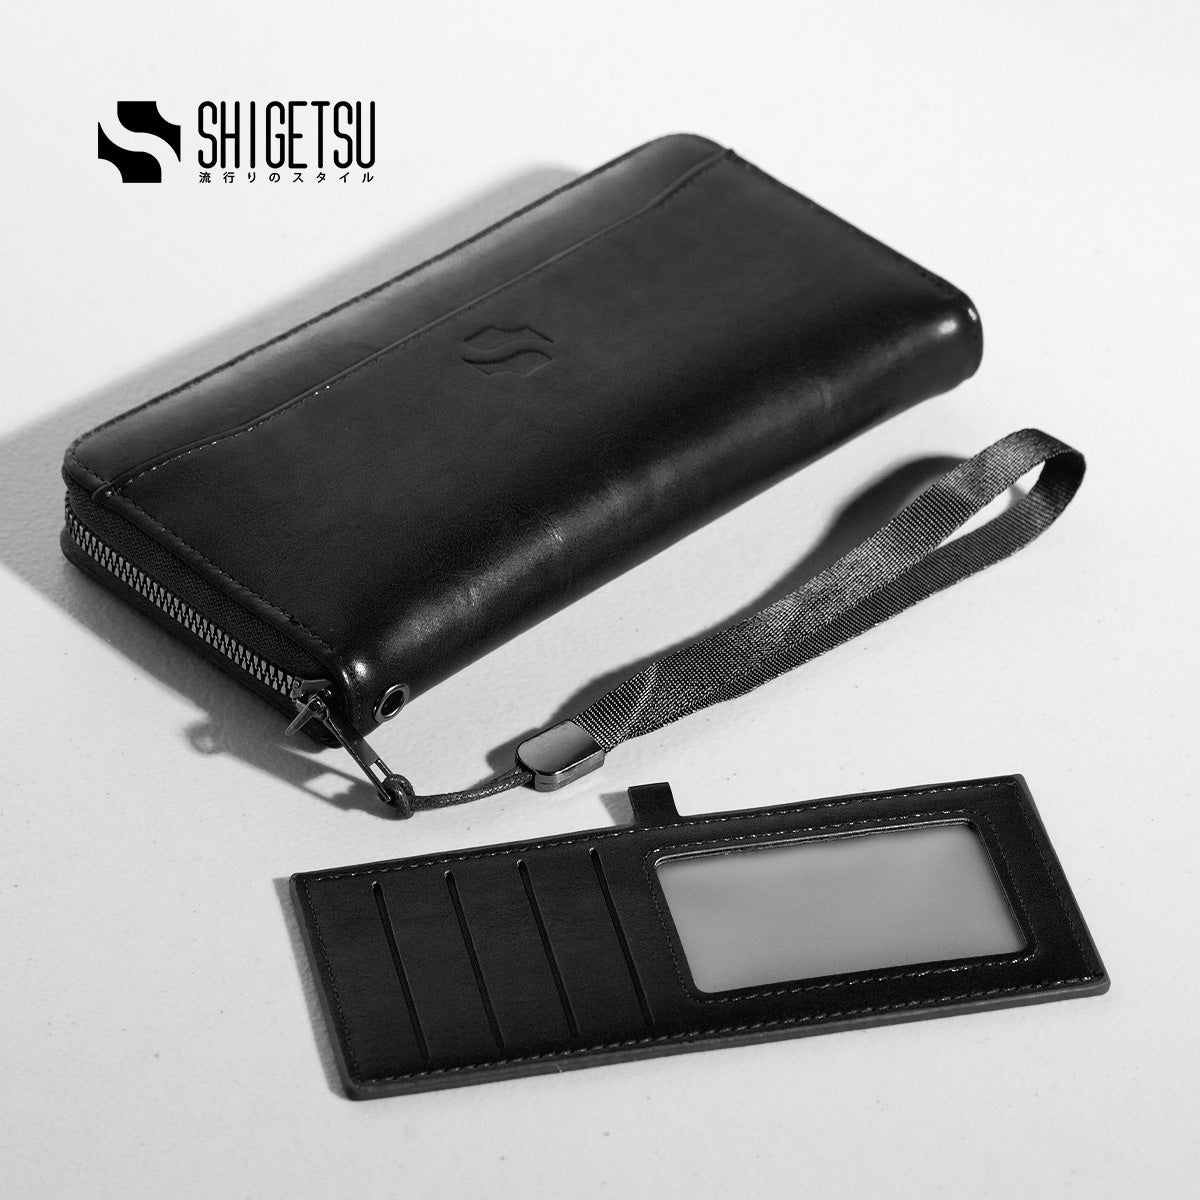 Shigetsu Ome Leather Wallet For Men Long Wallet